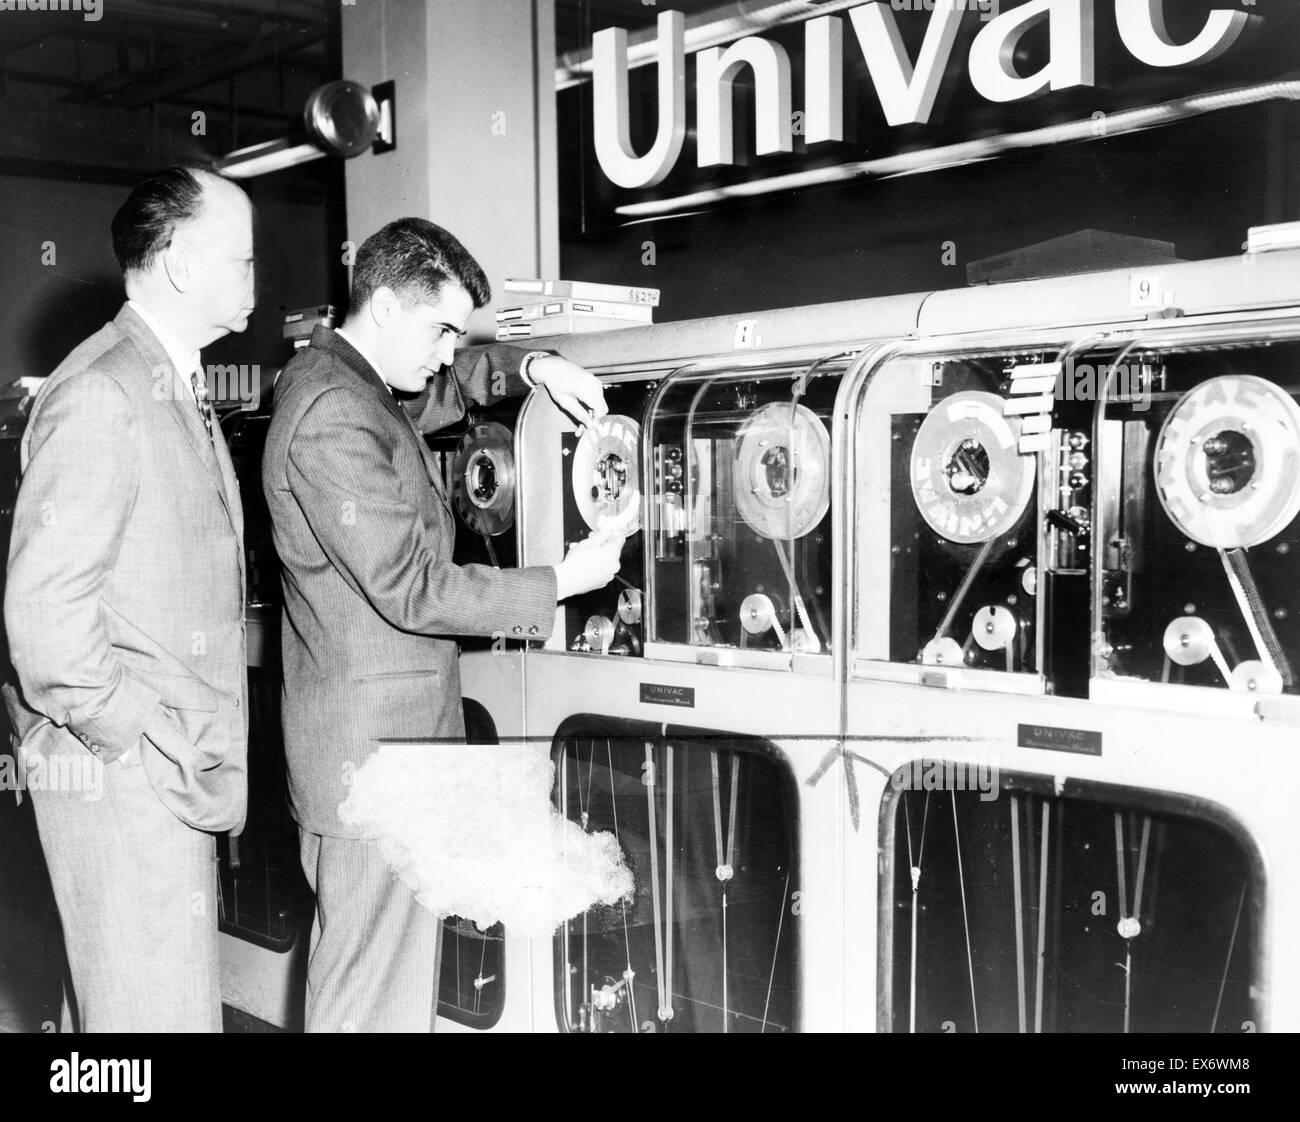 One man looks on as another man prepares Univac computer to predict a winning horse in a race Stock Photo